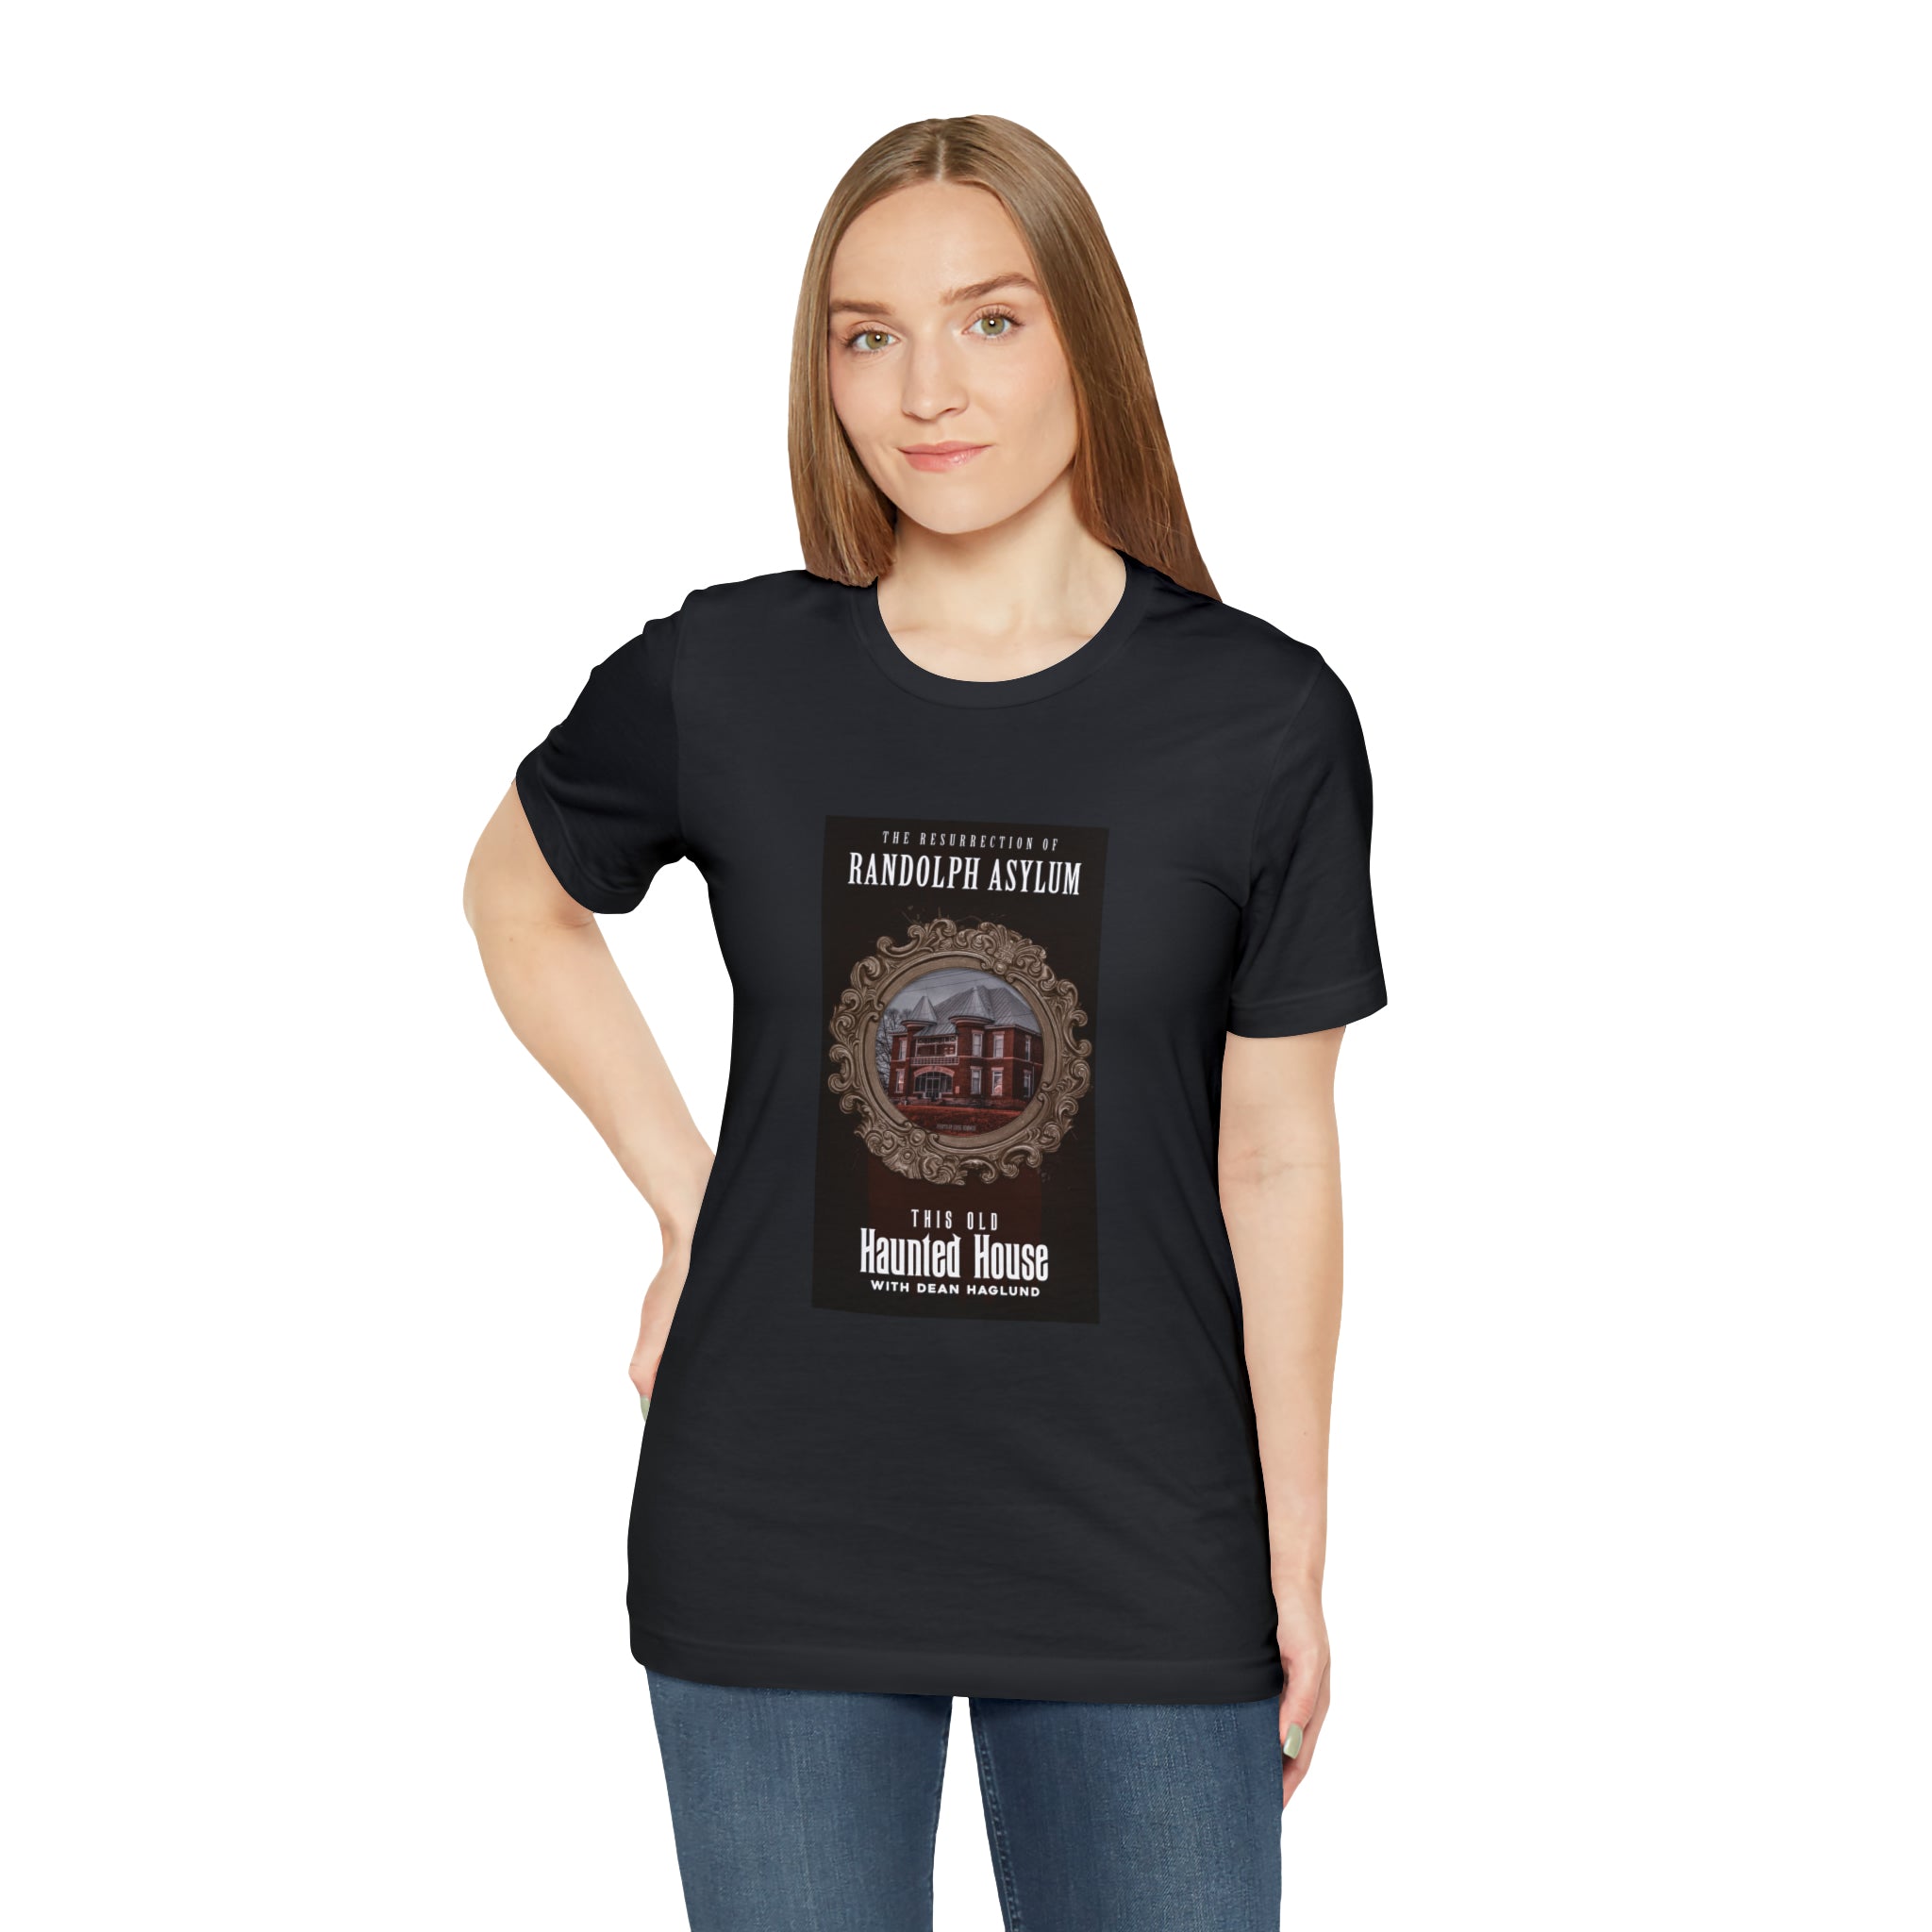 Randolph Asylum from "This Old Haunted House with Dean Haglund"  Unisex Gallery Tee